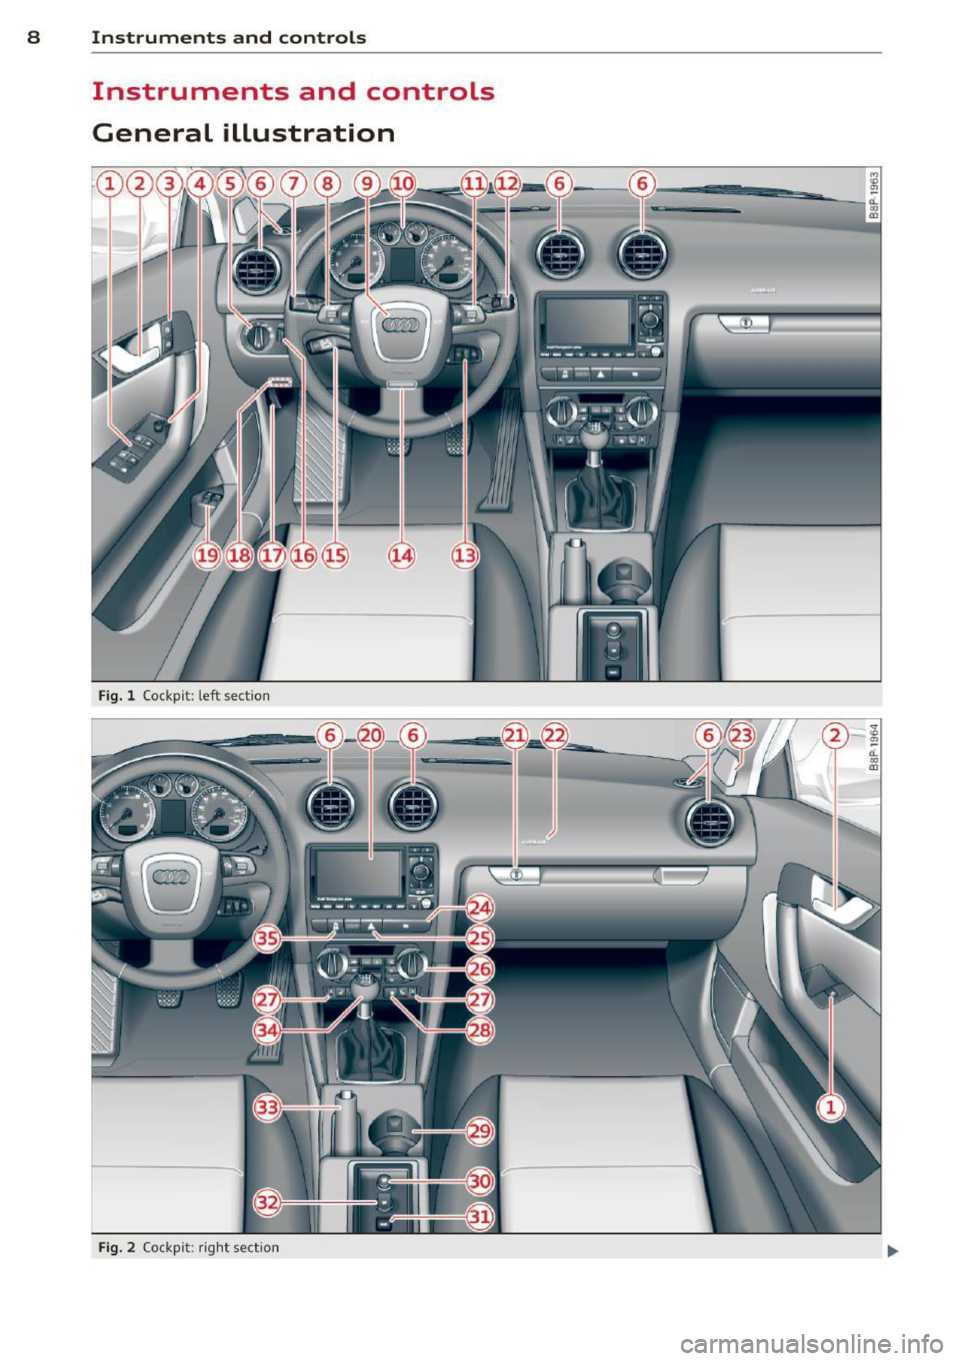 AUDI S3 2012  Owners Manual 8  Instruments and controls 
Instruments  and  controls 
General  illustration 
Fig. l Cockp it:  left  sect io n 
Fig. 2 Co ck pi t: ri ght  sect io n 
" 
~:::::.--a!!!,~- -i  